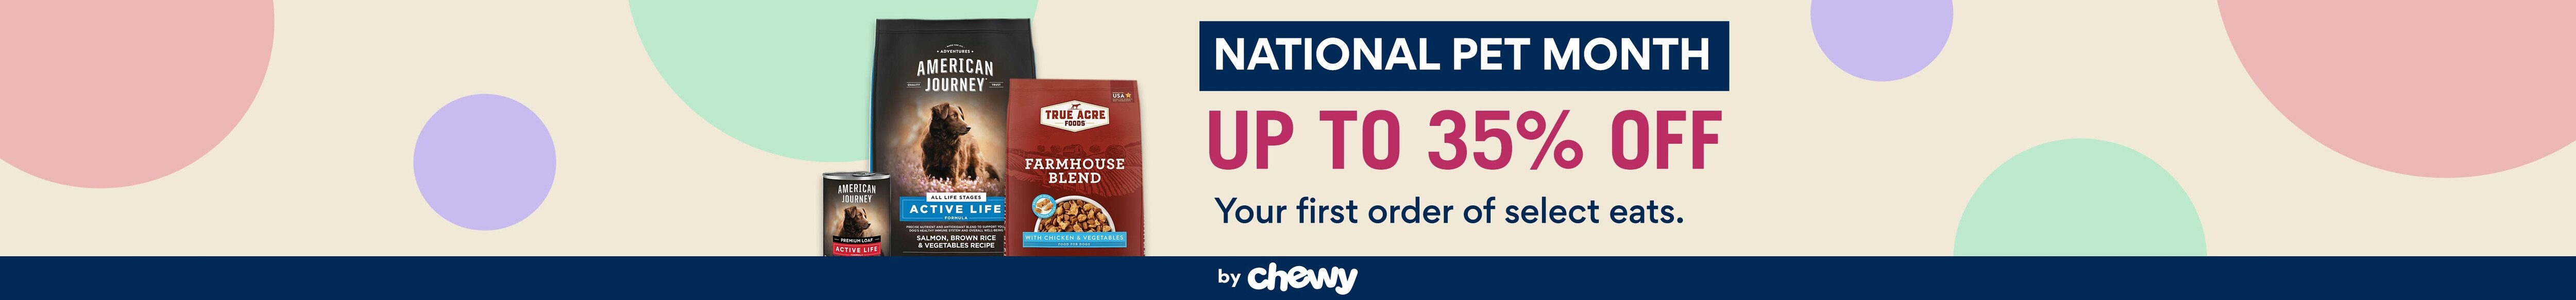 National Pet Month. Reward your #1. Celebrate with savings on eats from top-rated brands by Chewy.